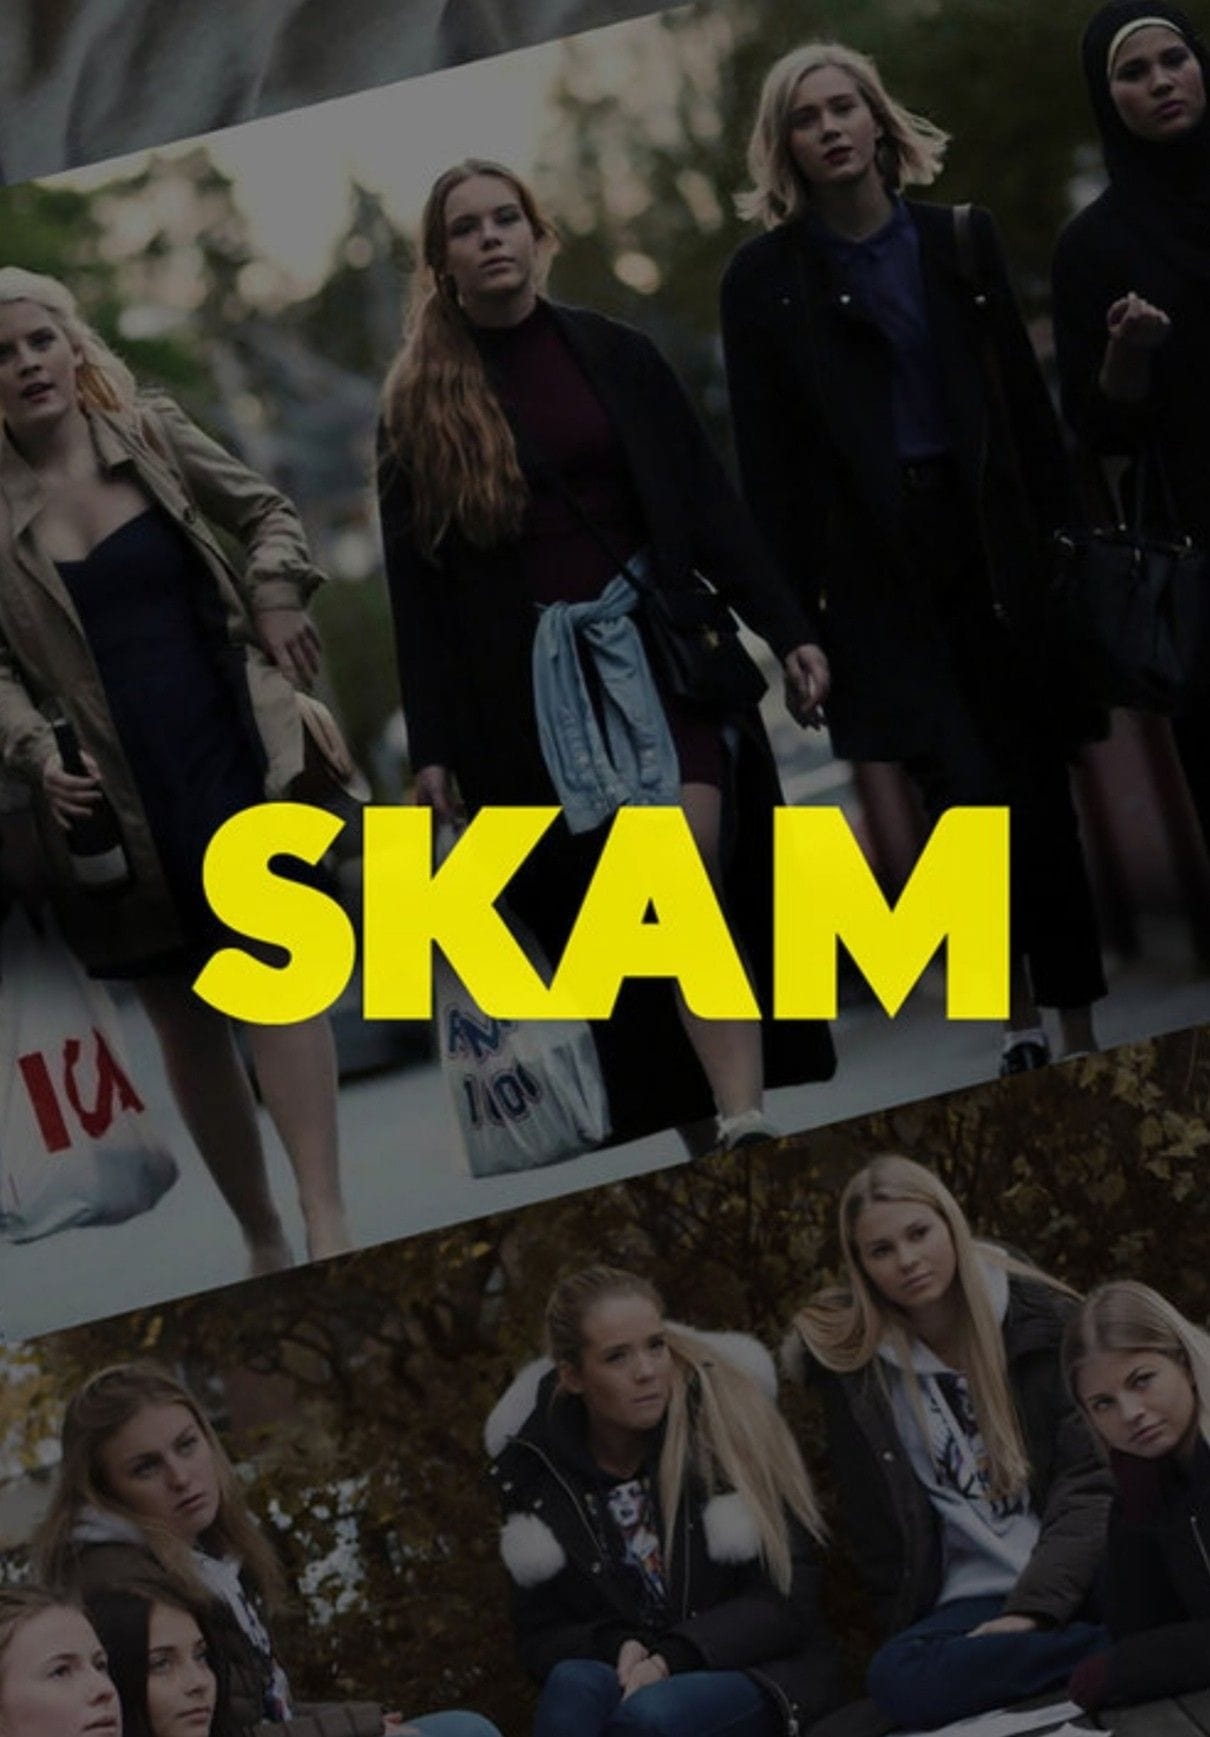 Skam TV Shows About Muslim